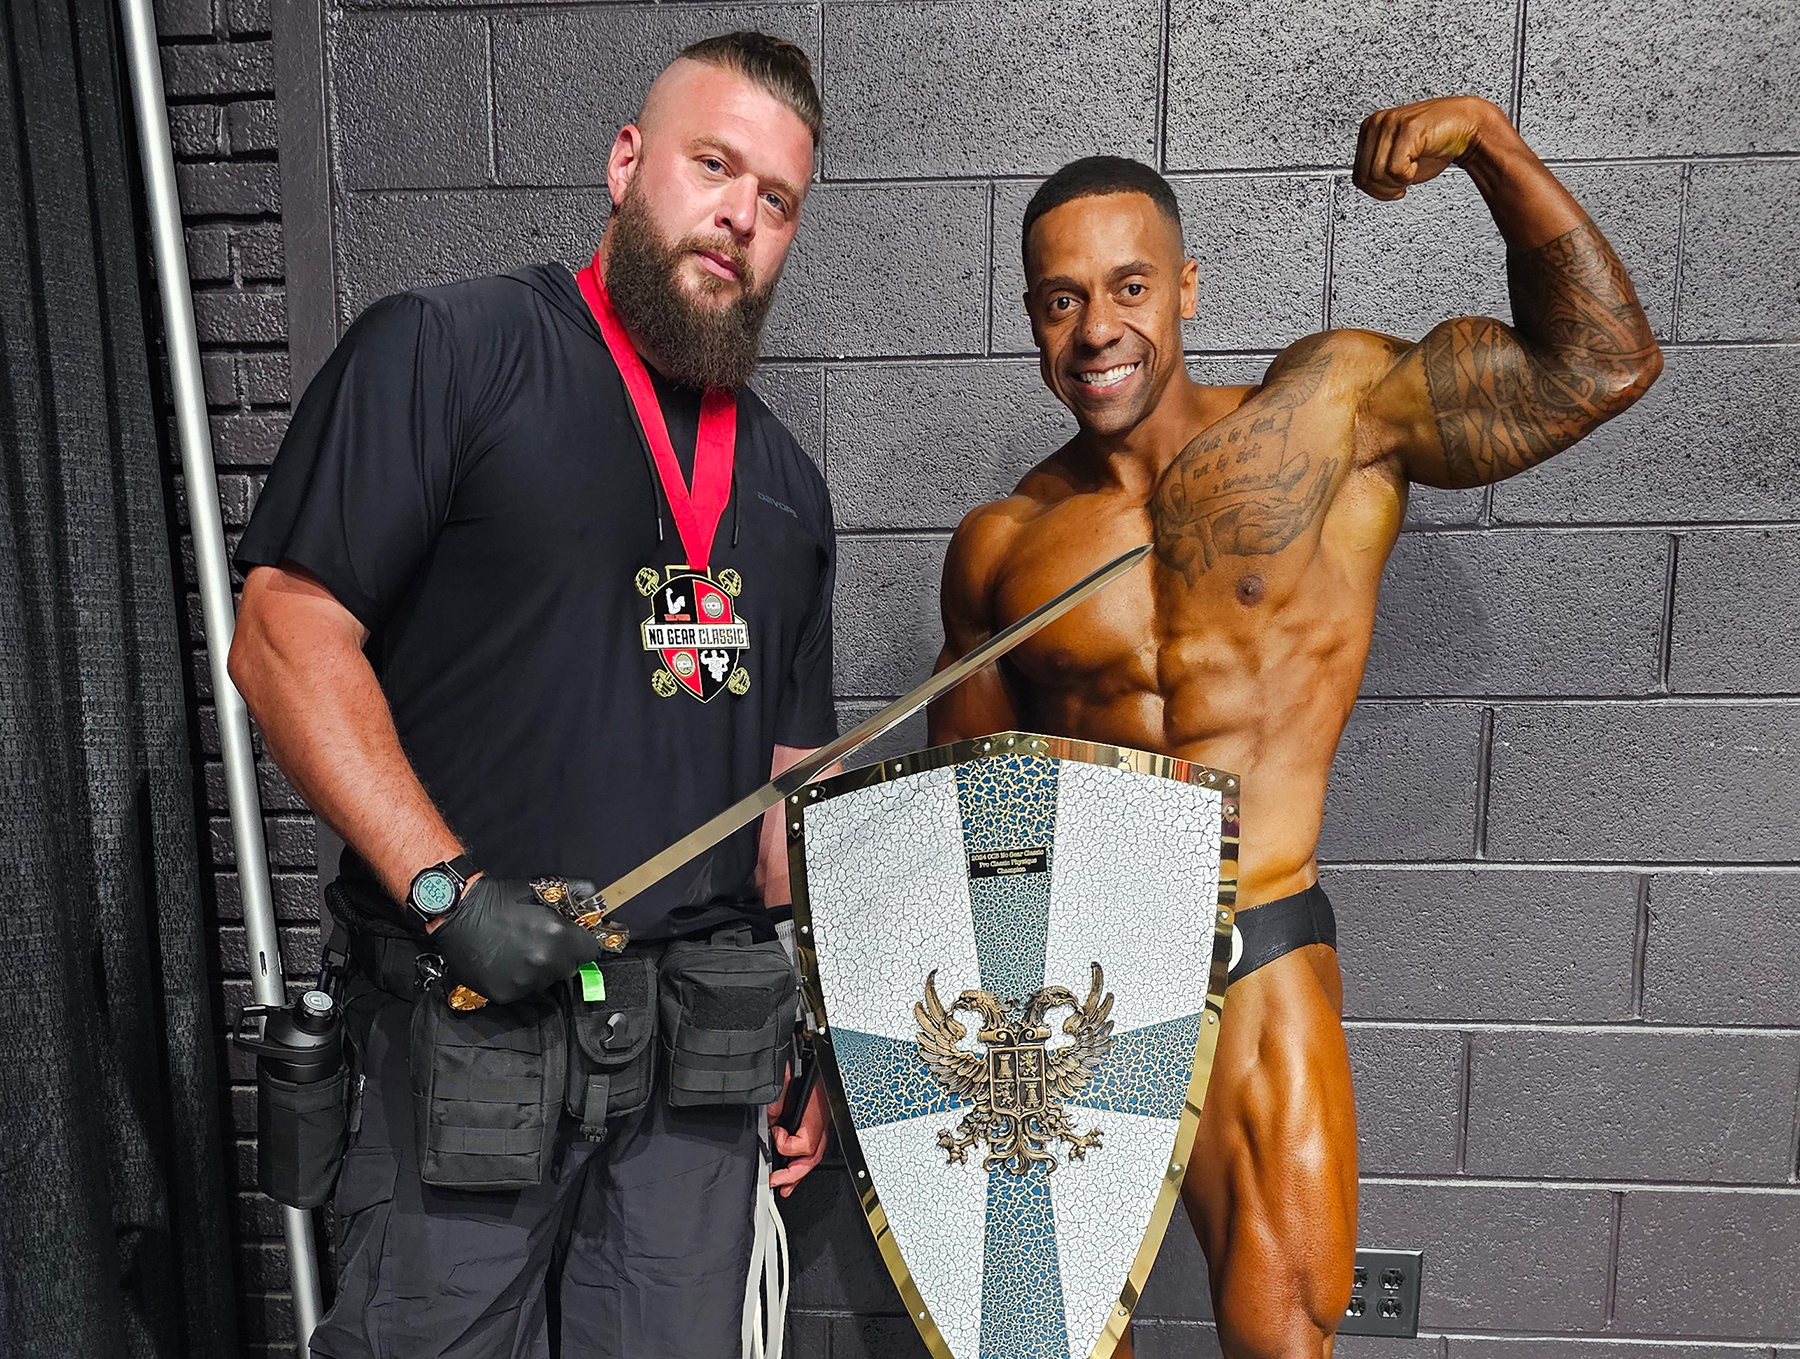 Dylan Toliver wins the Pro Classic Physique Overall at the 2024 OCB No Gear Classic Natural Bodybuilding Contest